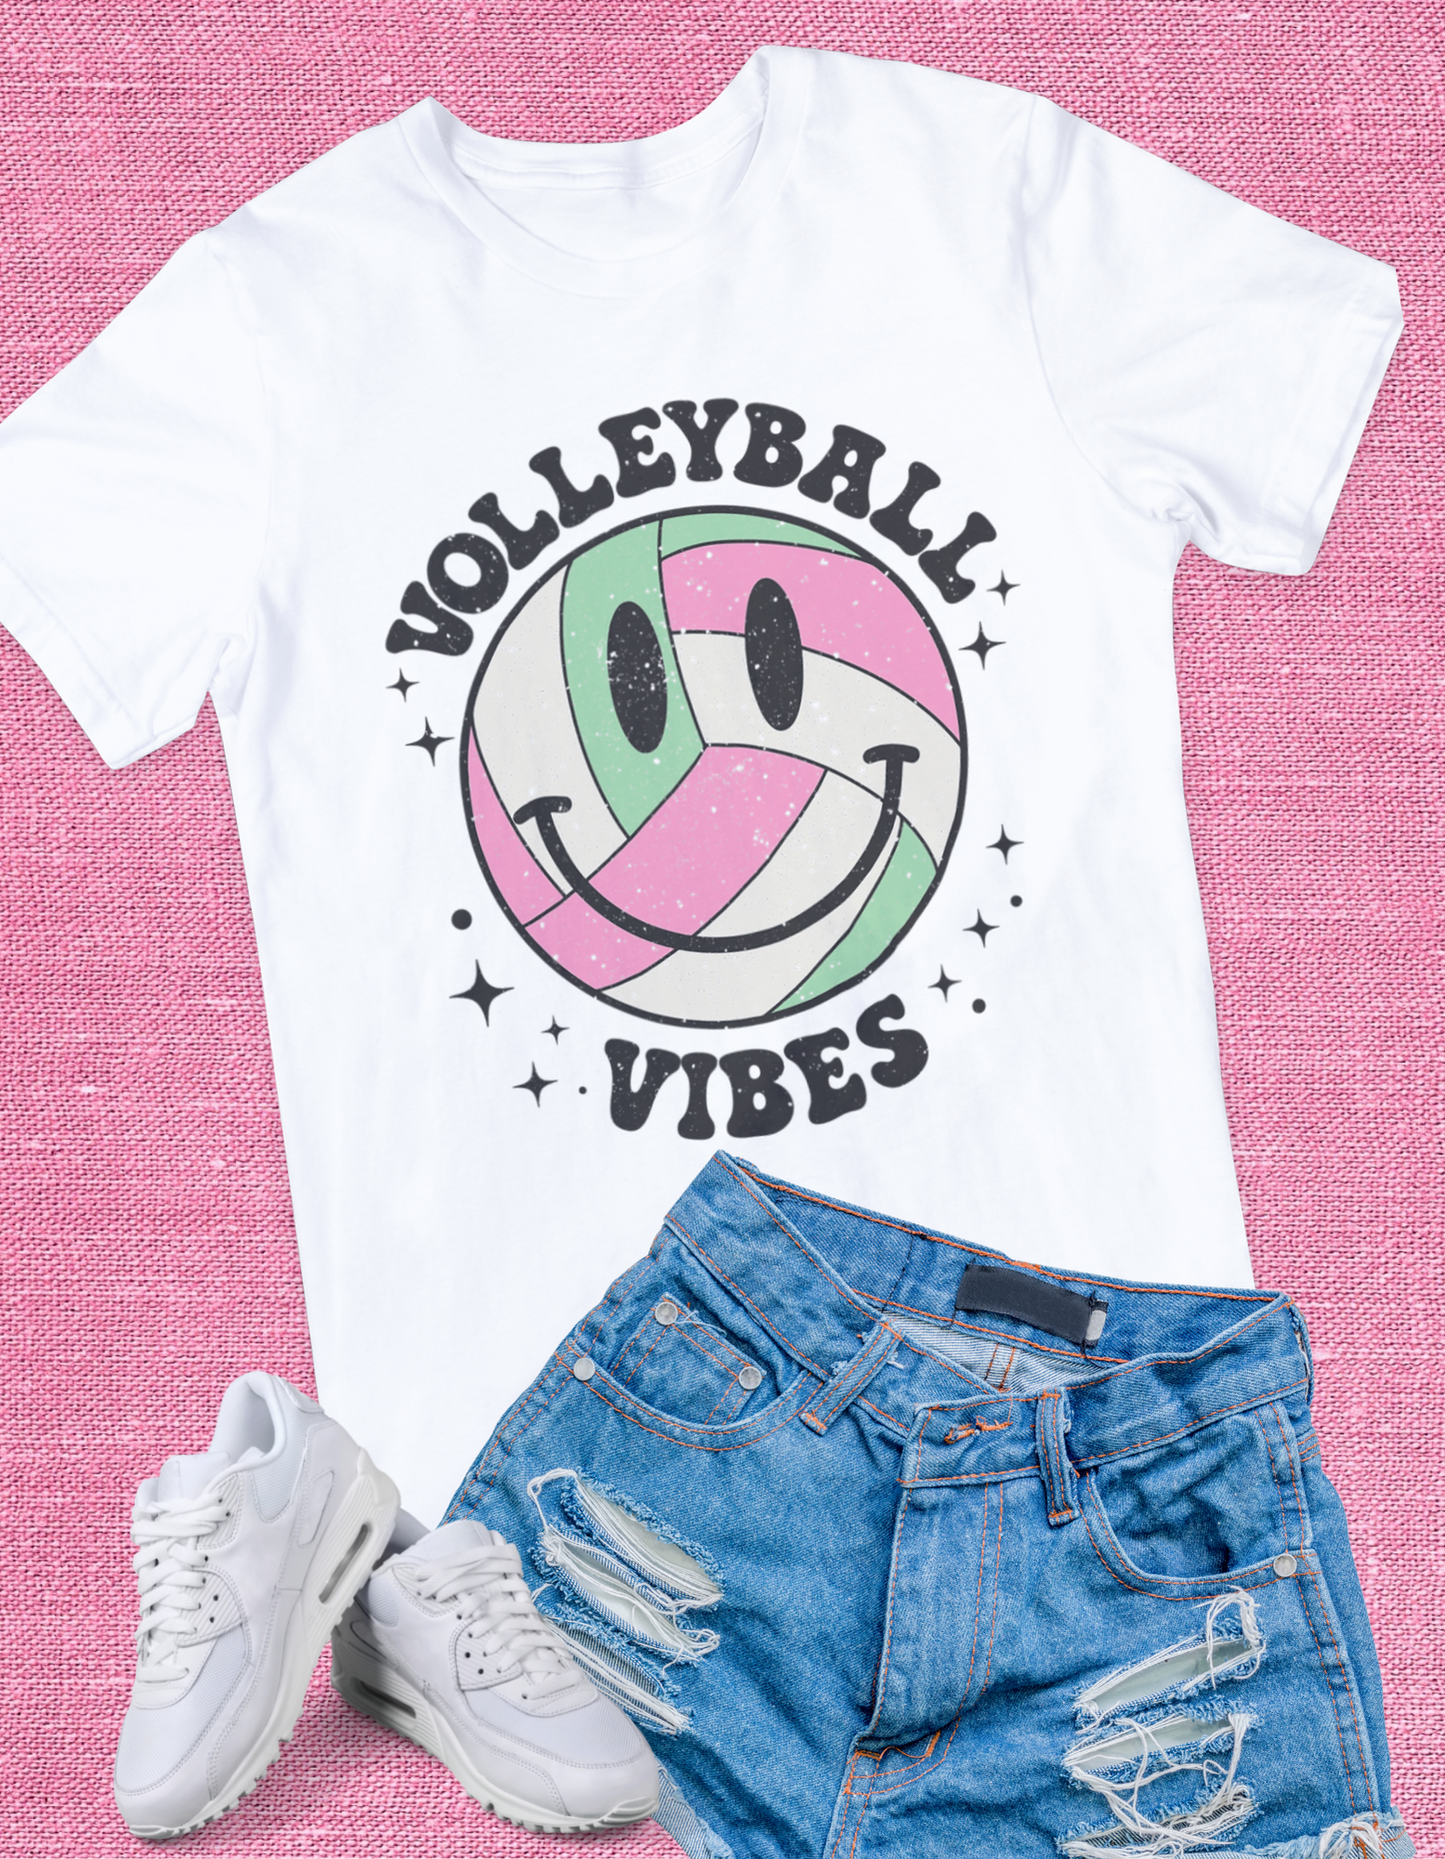 Volleyball Vibes Tshirt